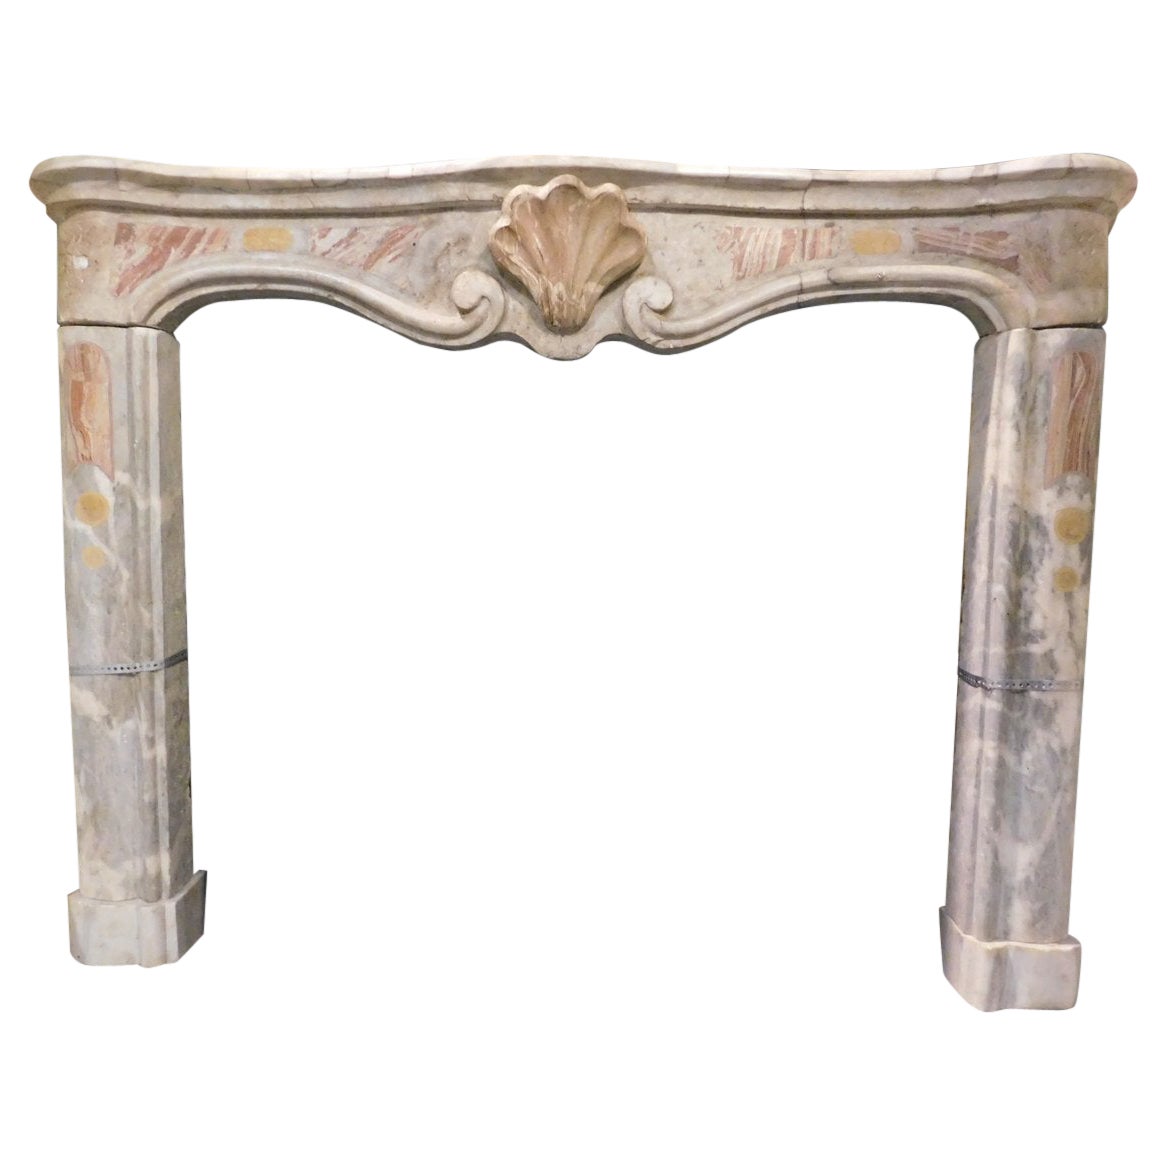 Fireplace mantle in Bardiglio marble with onyx inlays from Busca, Italy For Sale